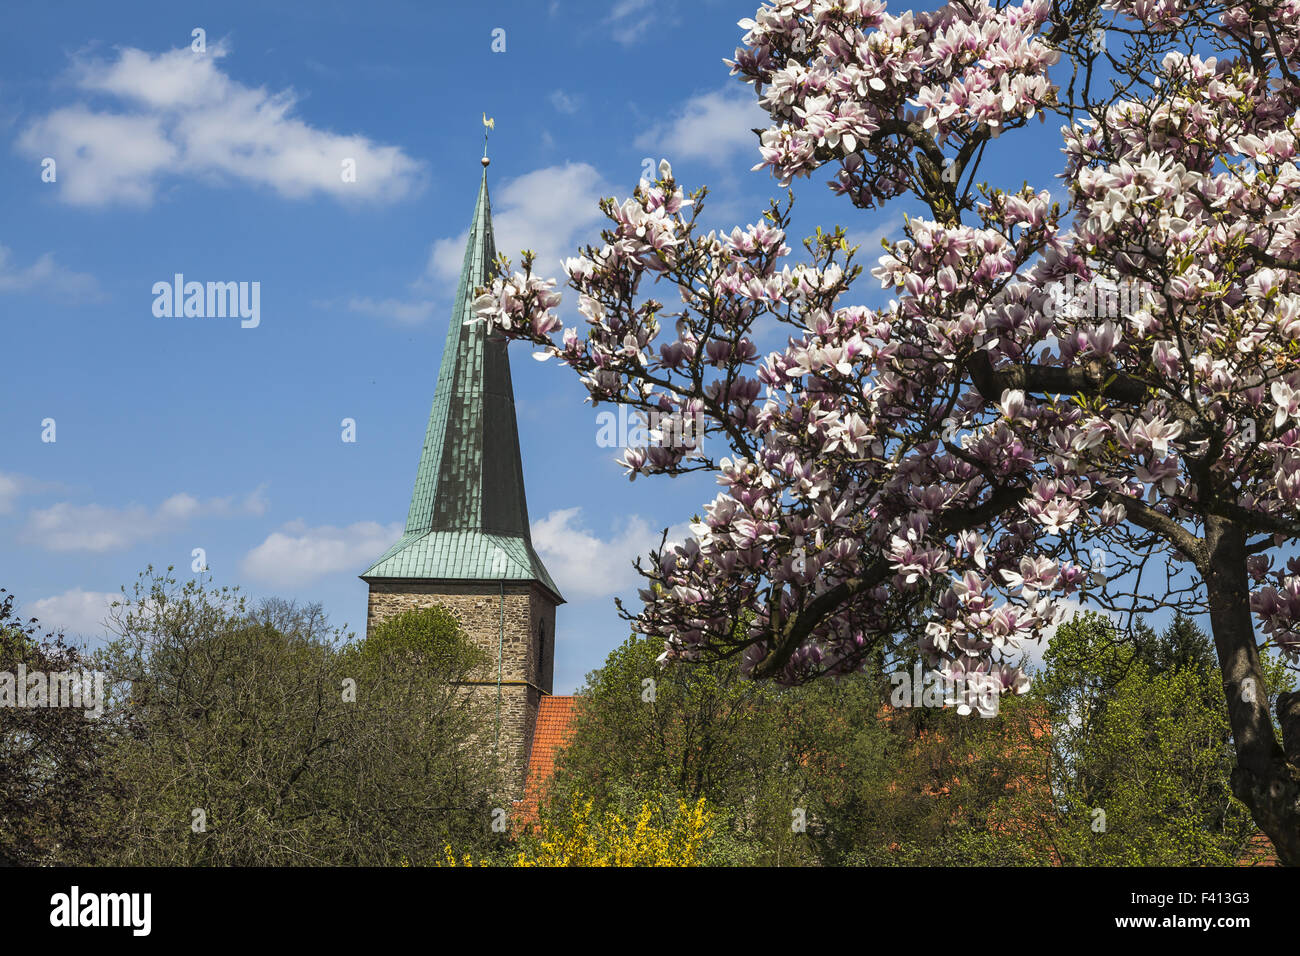 Evangelical St. Laurentius church in Germany Stock Photo